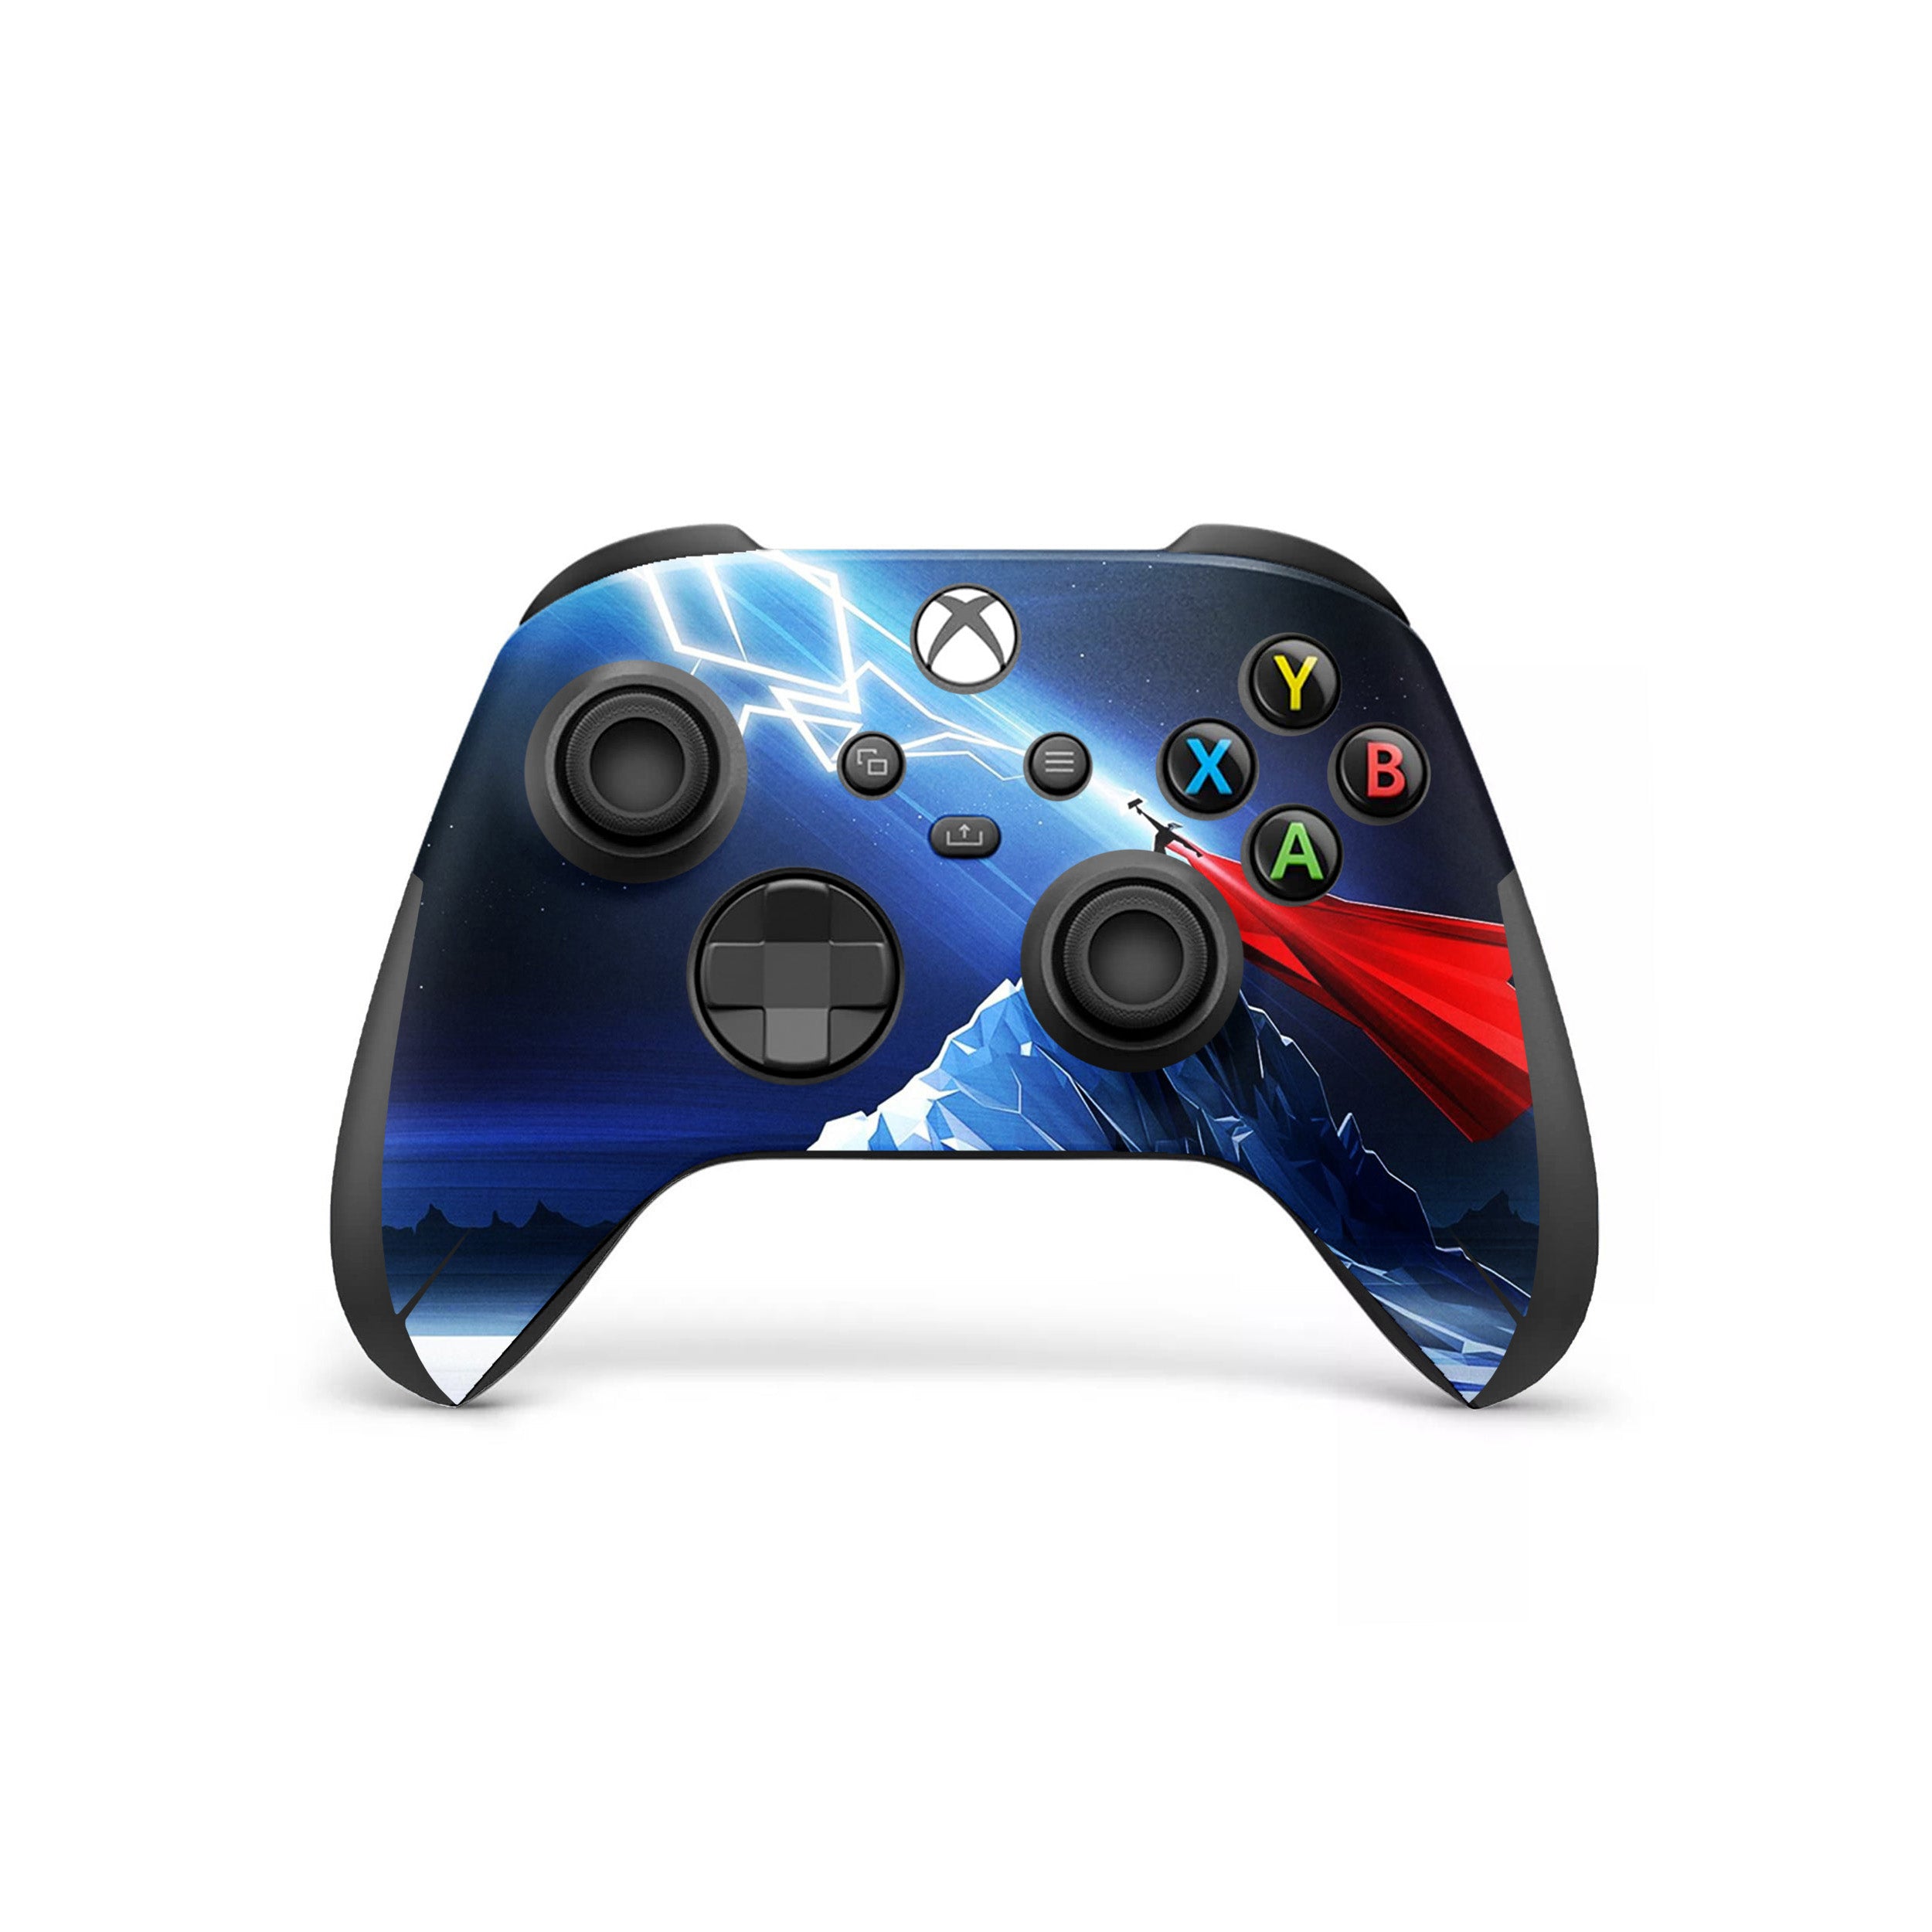 A video game skin featuring a Marvel Thor design for the Xbox Wireless Controller.